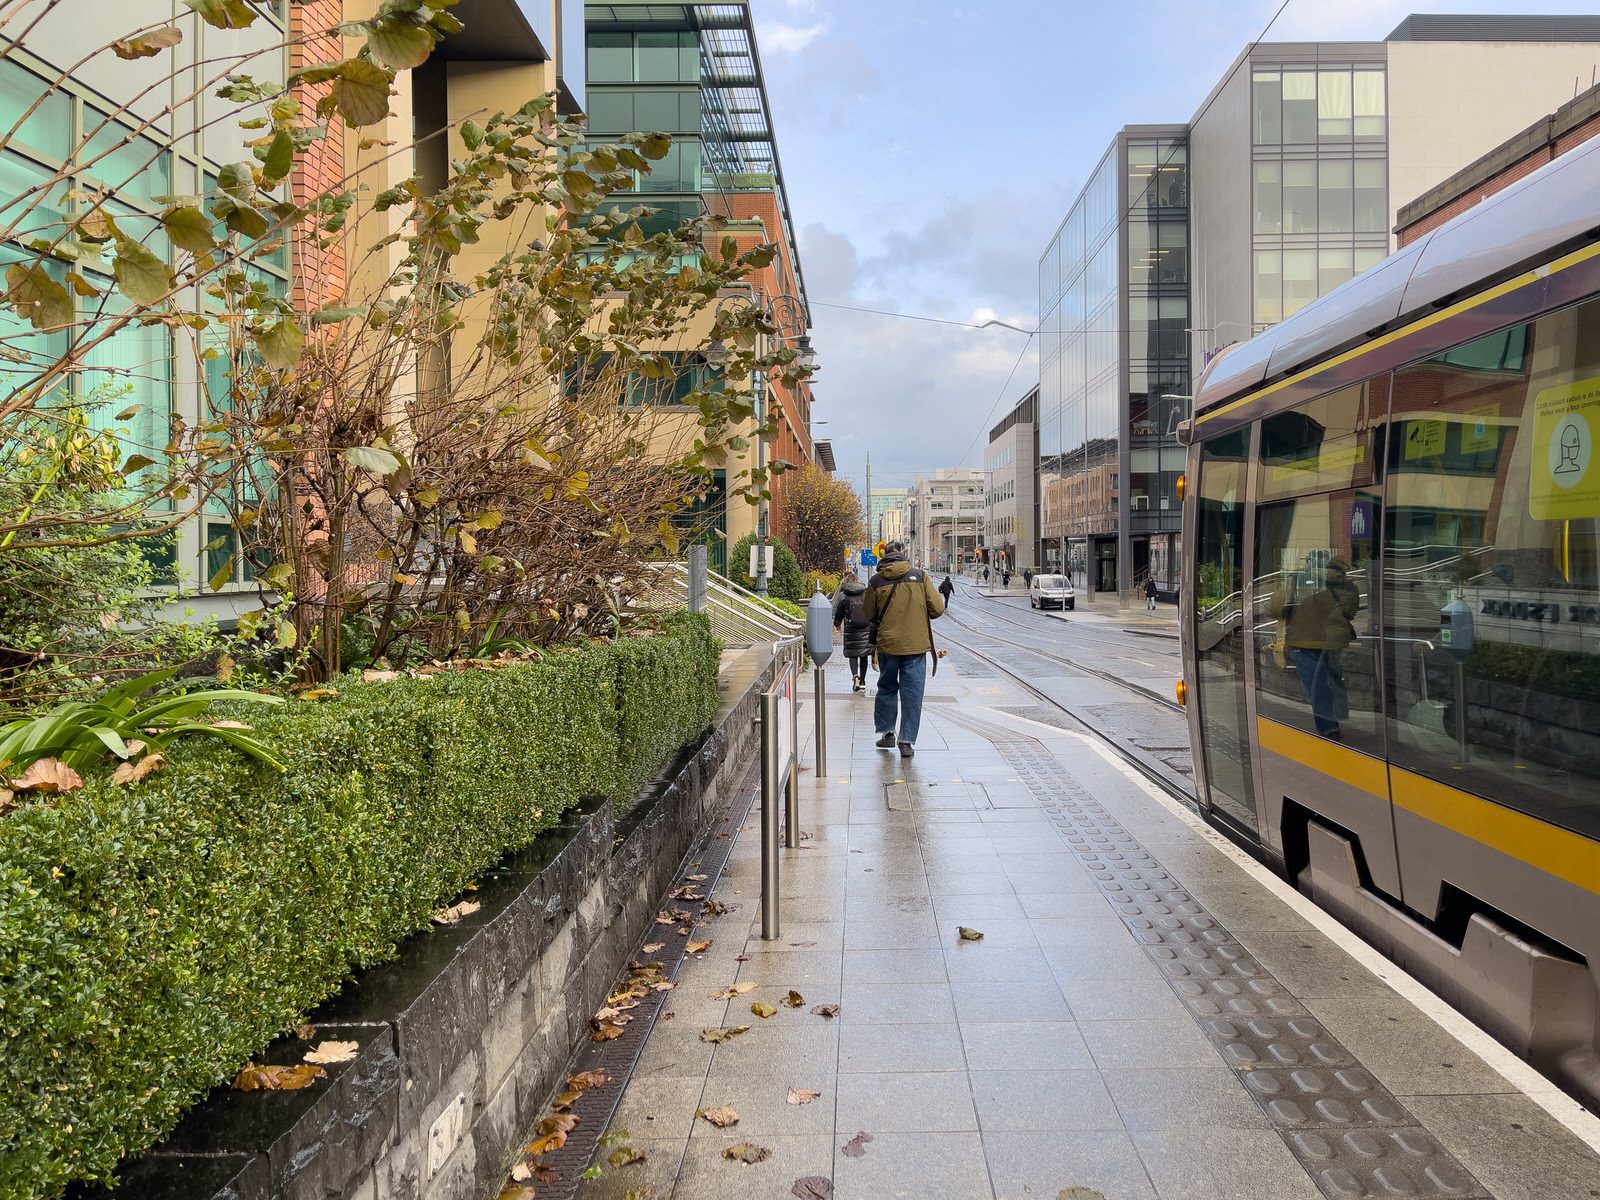 THE LUAS TRAM STOP AT GEORGE'S DOCK 002